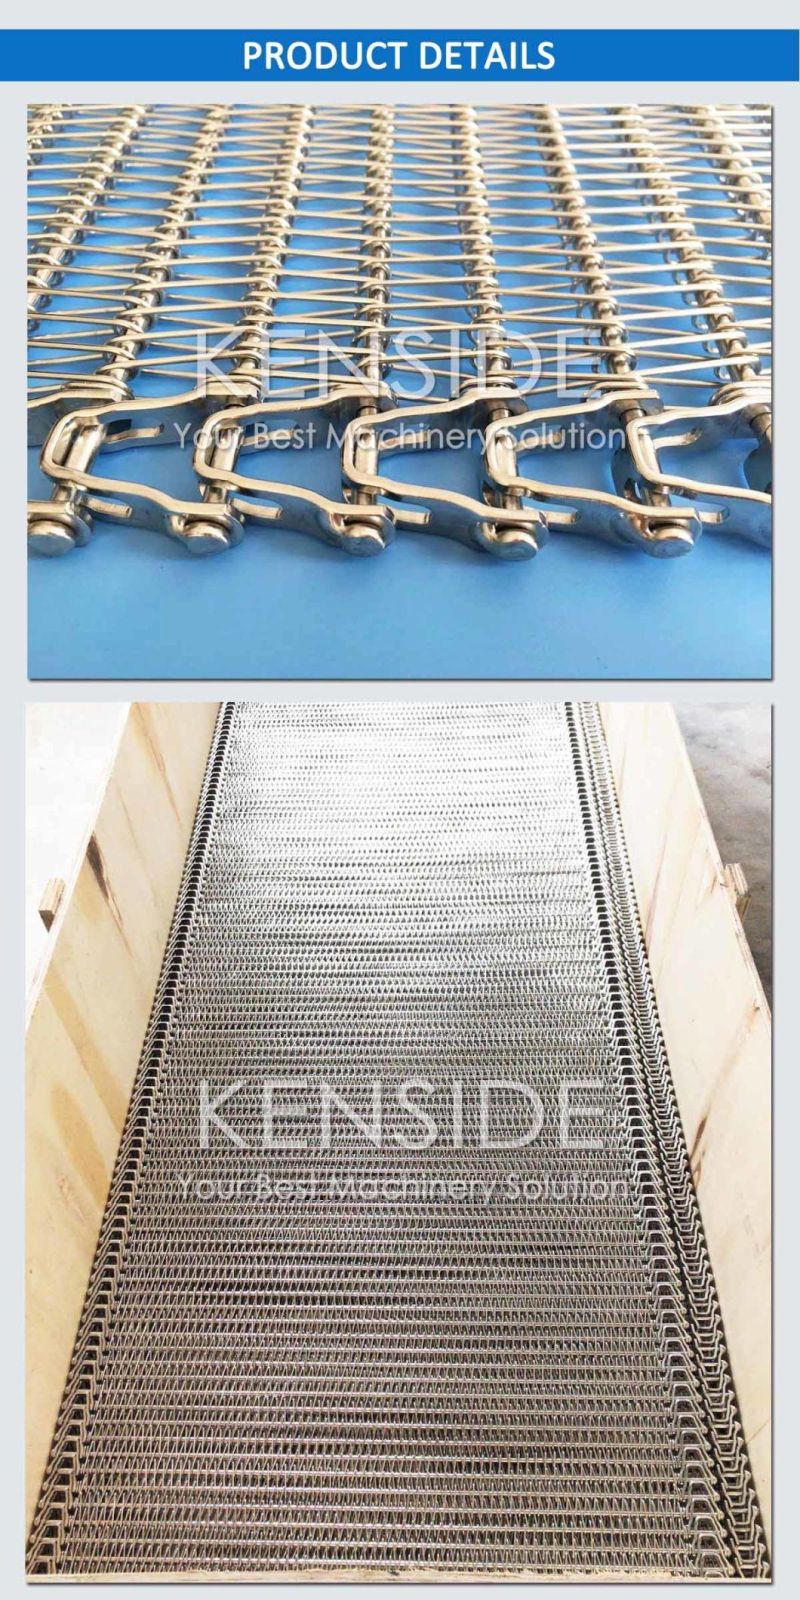 Stainless Steel Belting Spiral Conveyor Belts Reduced Radius Belts for Food Processing Industry